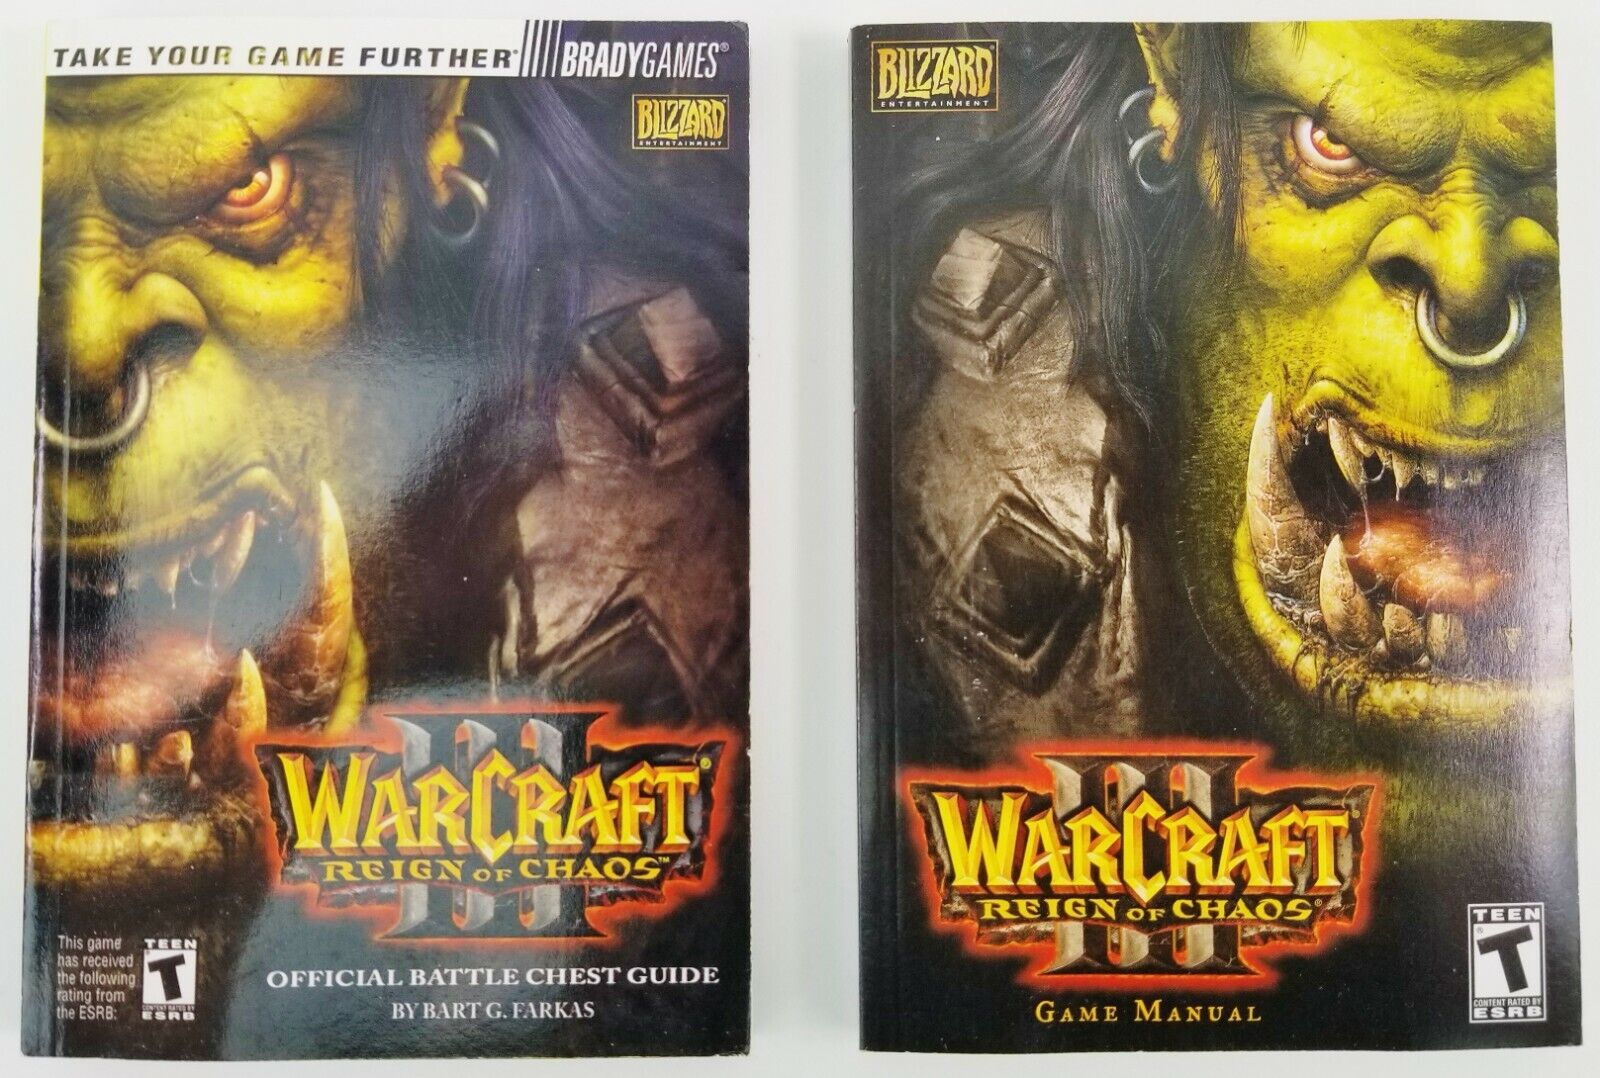 Warcraft Reign of Chaos Lot of 2 Game Manual & Battle Chest Guide Books Blizzard